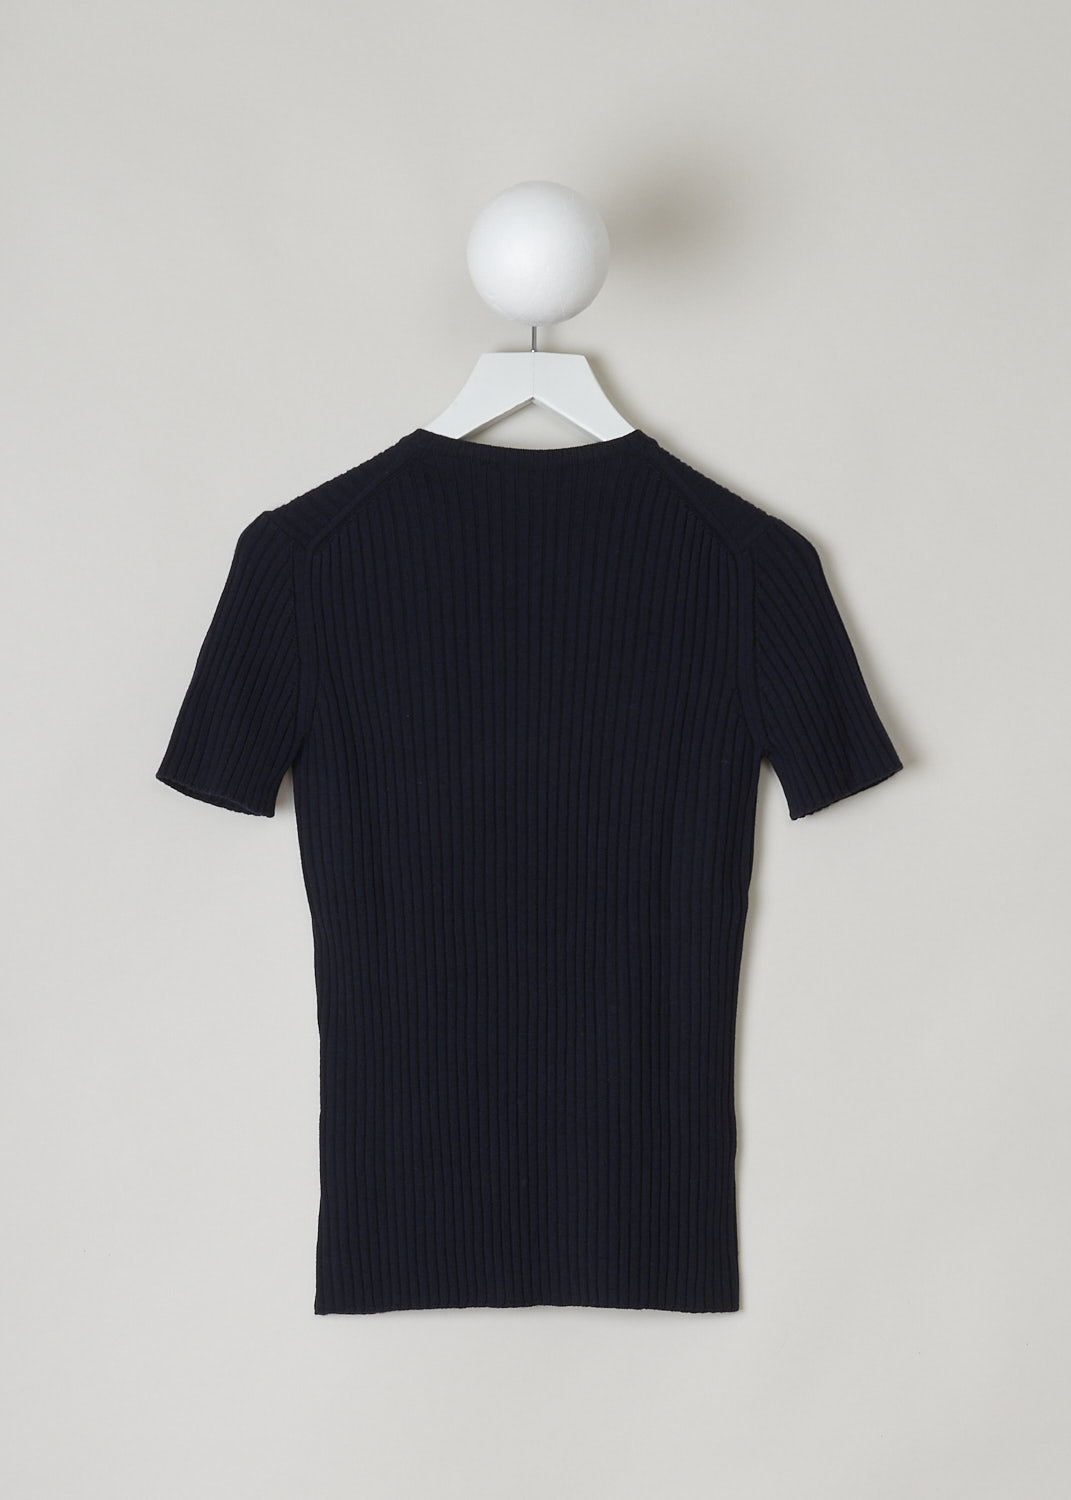 CHLOÃ‰, NAVY BLUE RIBBED TOP, CHC22UMP38650476_DARK_NIGHT_BLUE, Blue, Back, This navy blue ribbed top has a round neckline, short sleeves and a placket with functional ball buttons that go down the front to about midway. The top has an elongated cut.
